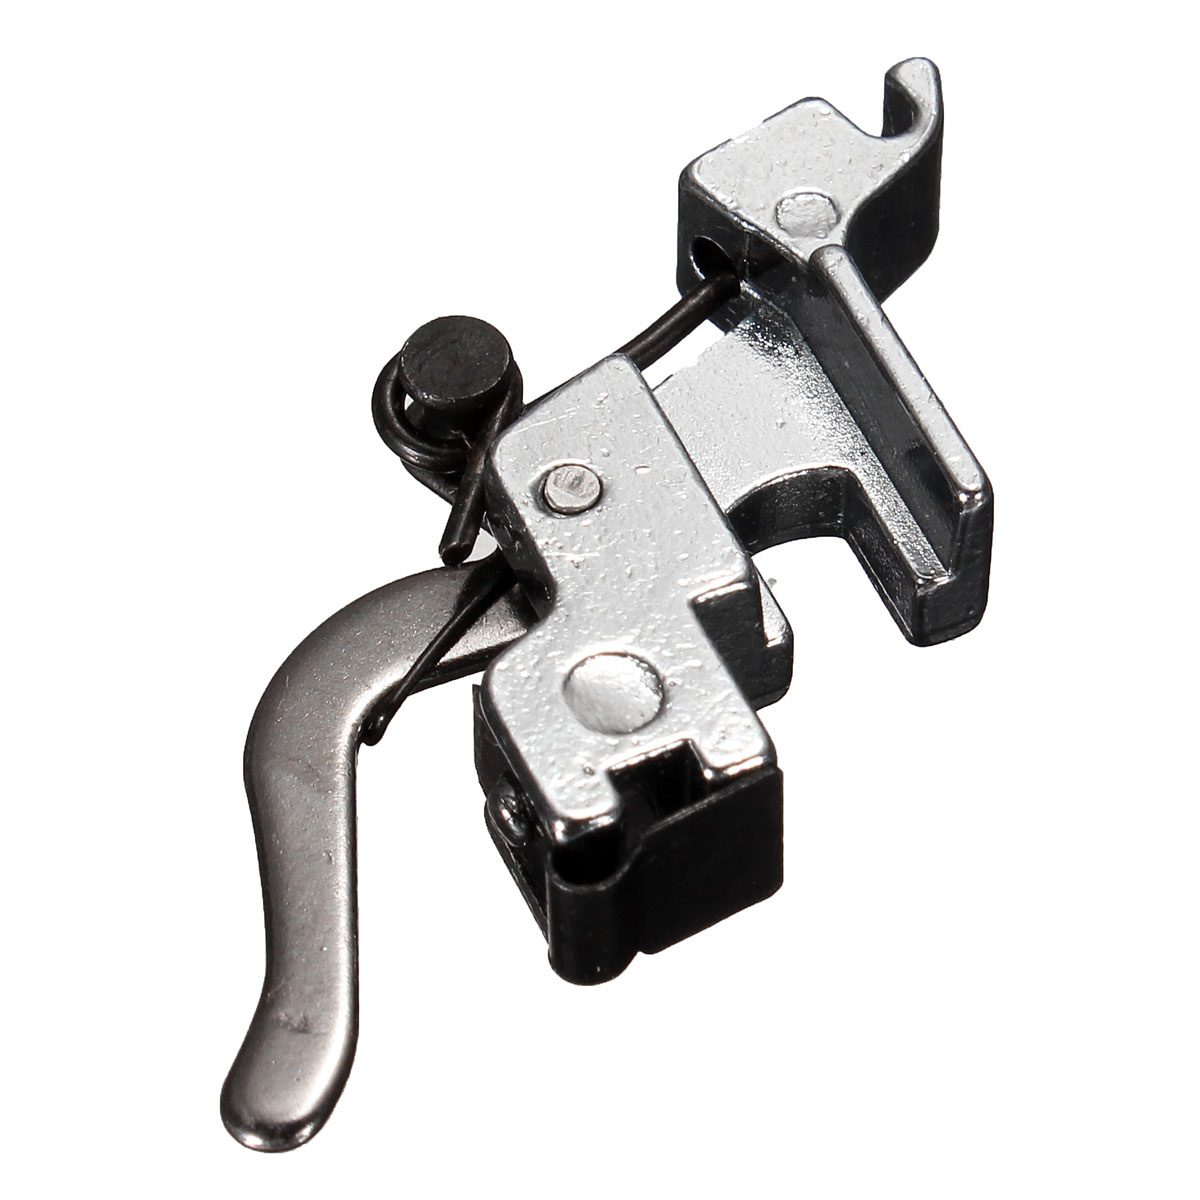 Stainless-Steel-Presser-Foot-Holder-Replacement-For-Household-Electric-Sewing-Machine-1017923